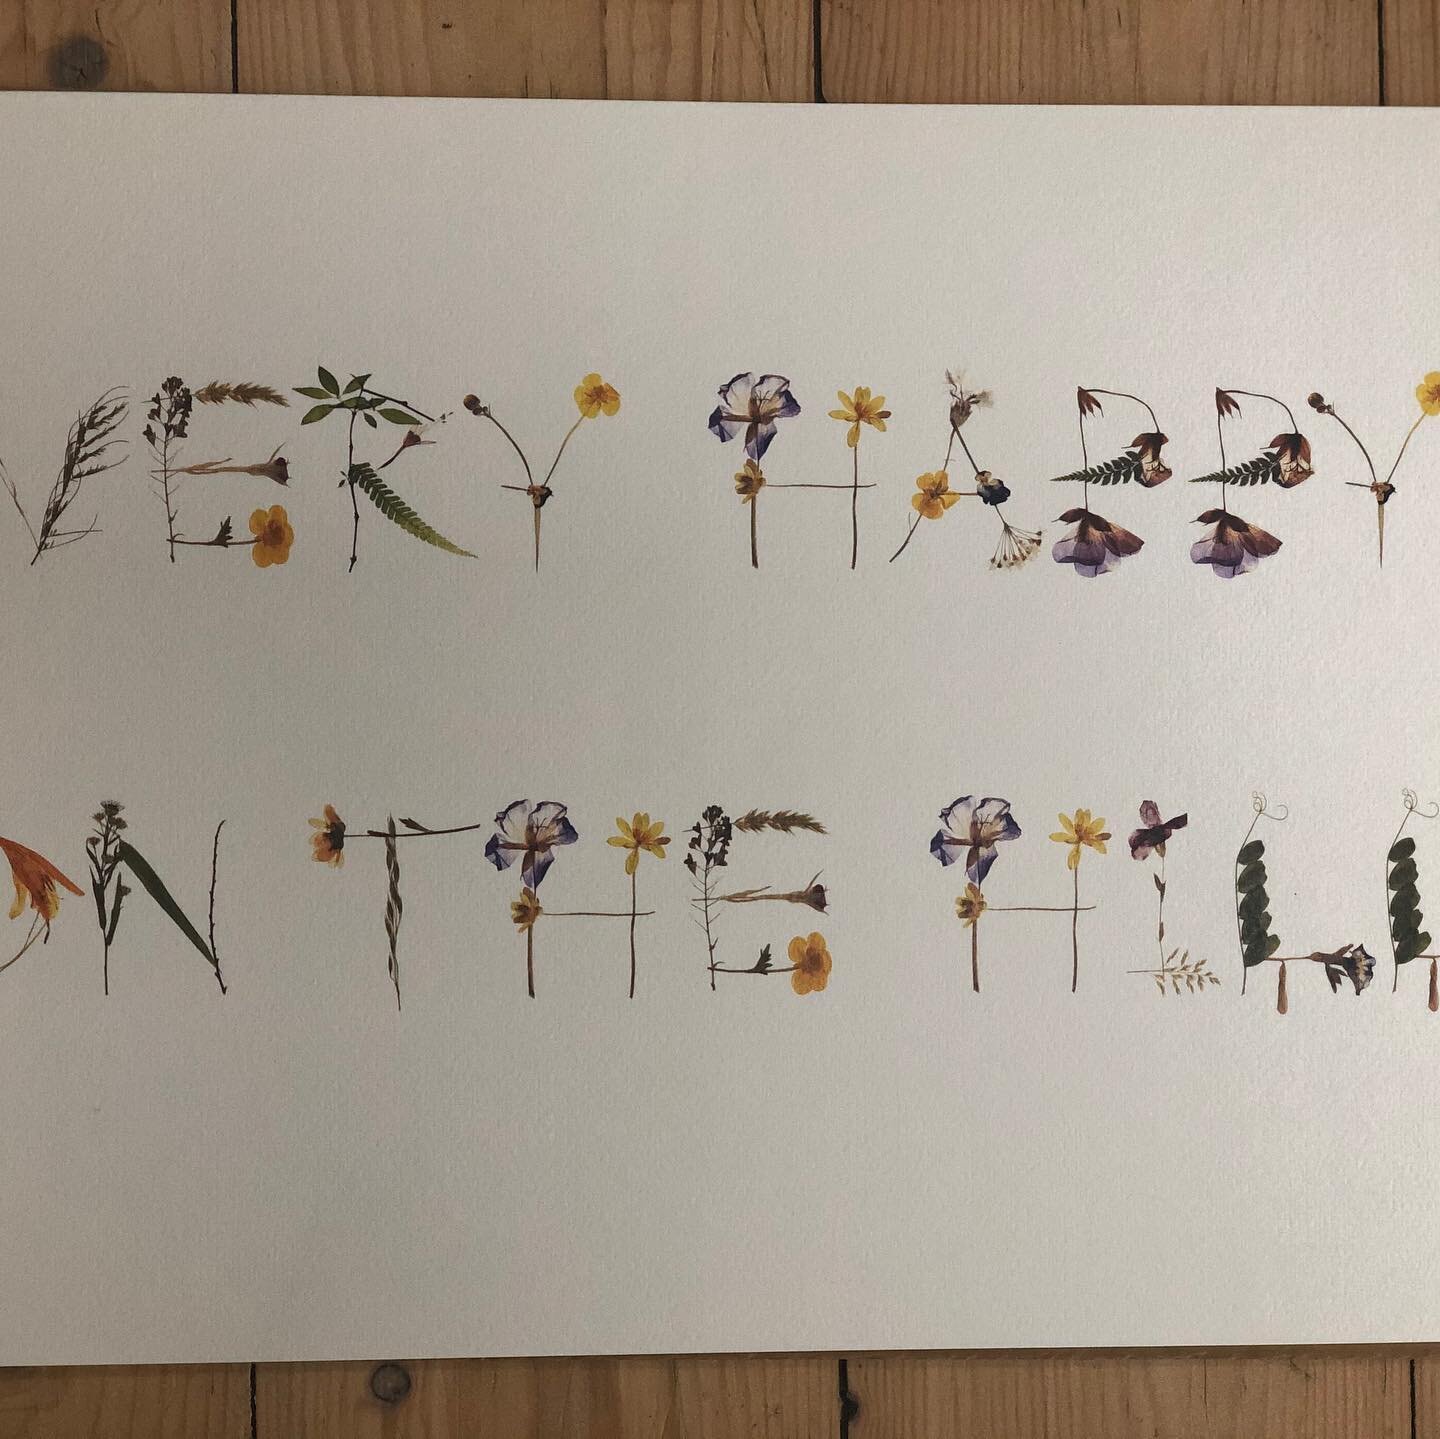 Take a look at this exquisite beautiful message made with pressed flowers by @wilderandwren  Kitten (photo2) It was heaven to have you shelter here for a little while in Gabriel&rsquo;s Wagon with little Meadow. You are genius with flowers - check ou